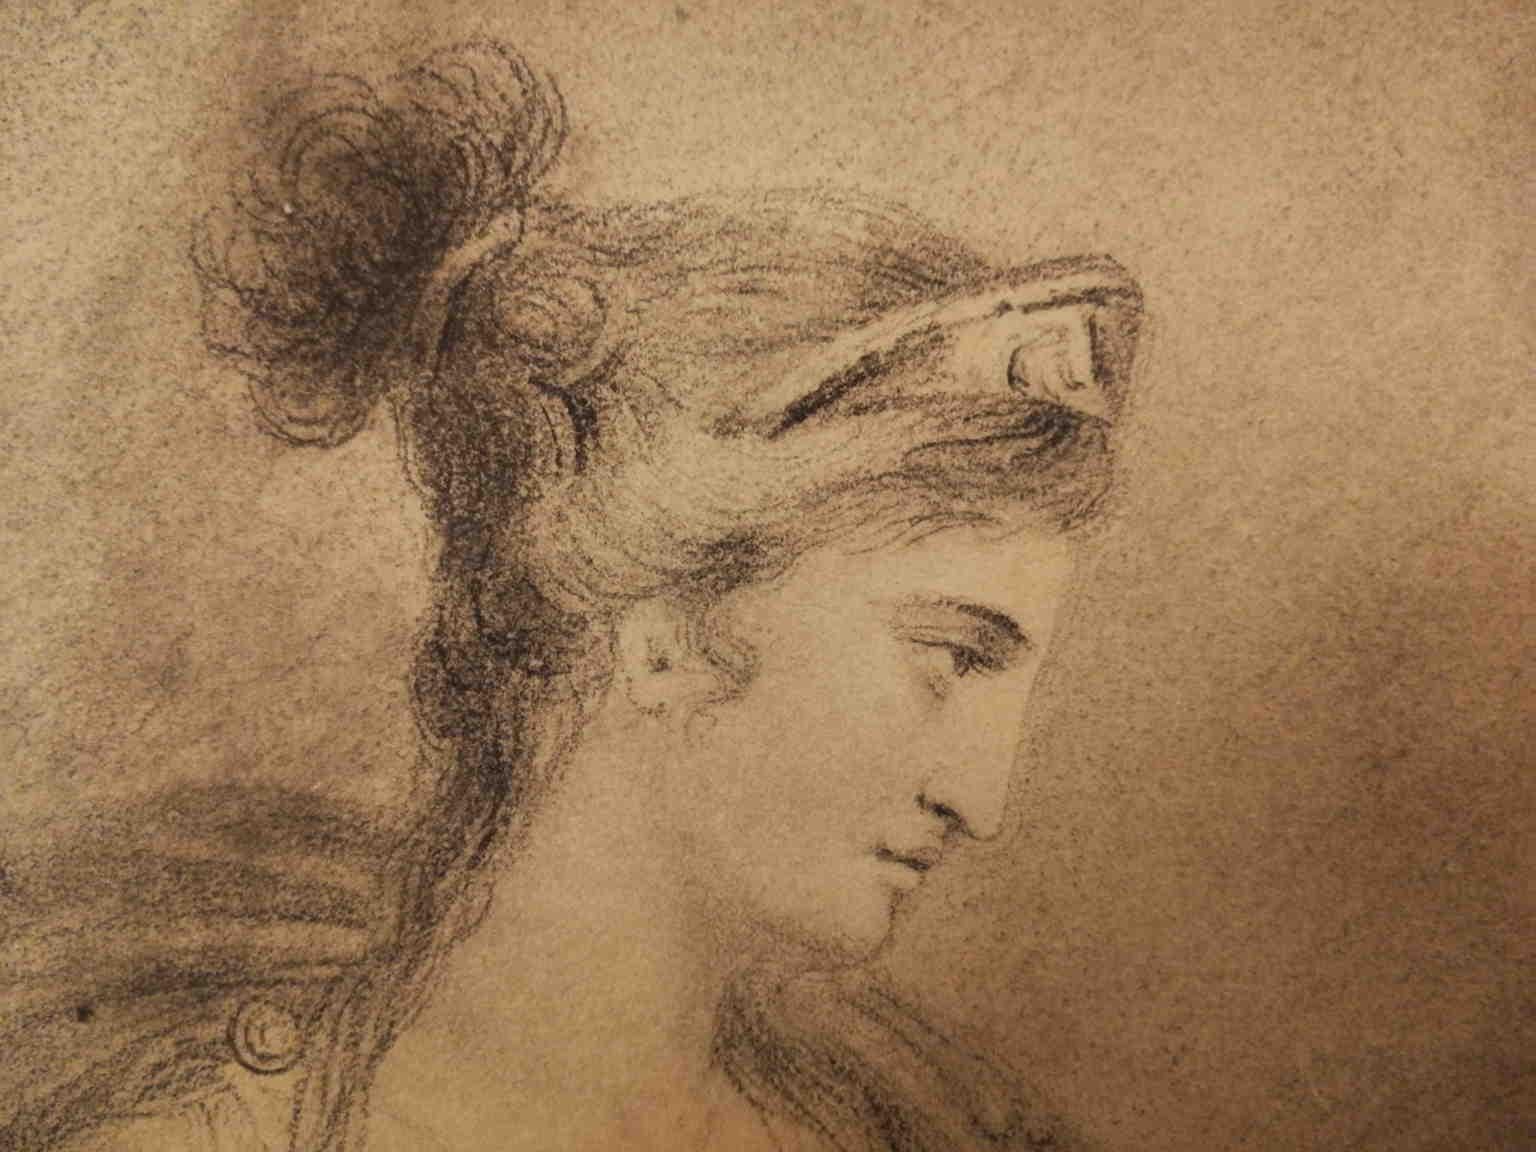 drawings from the 1800s